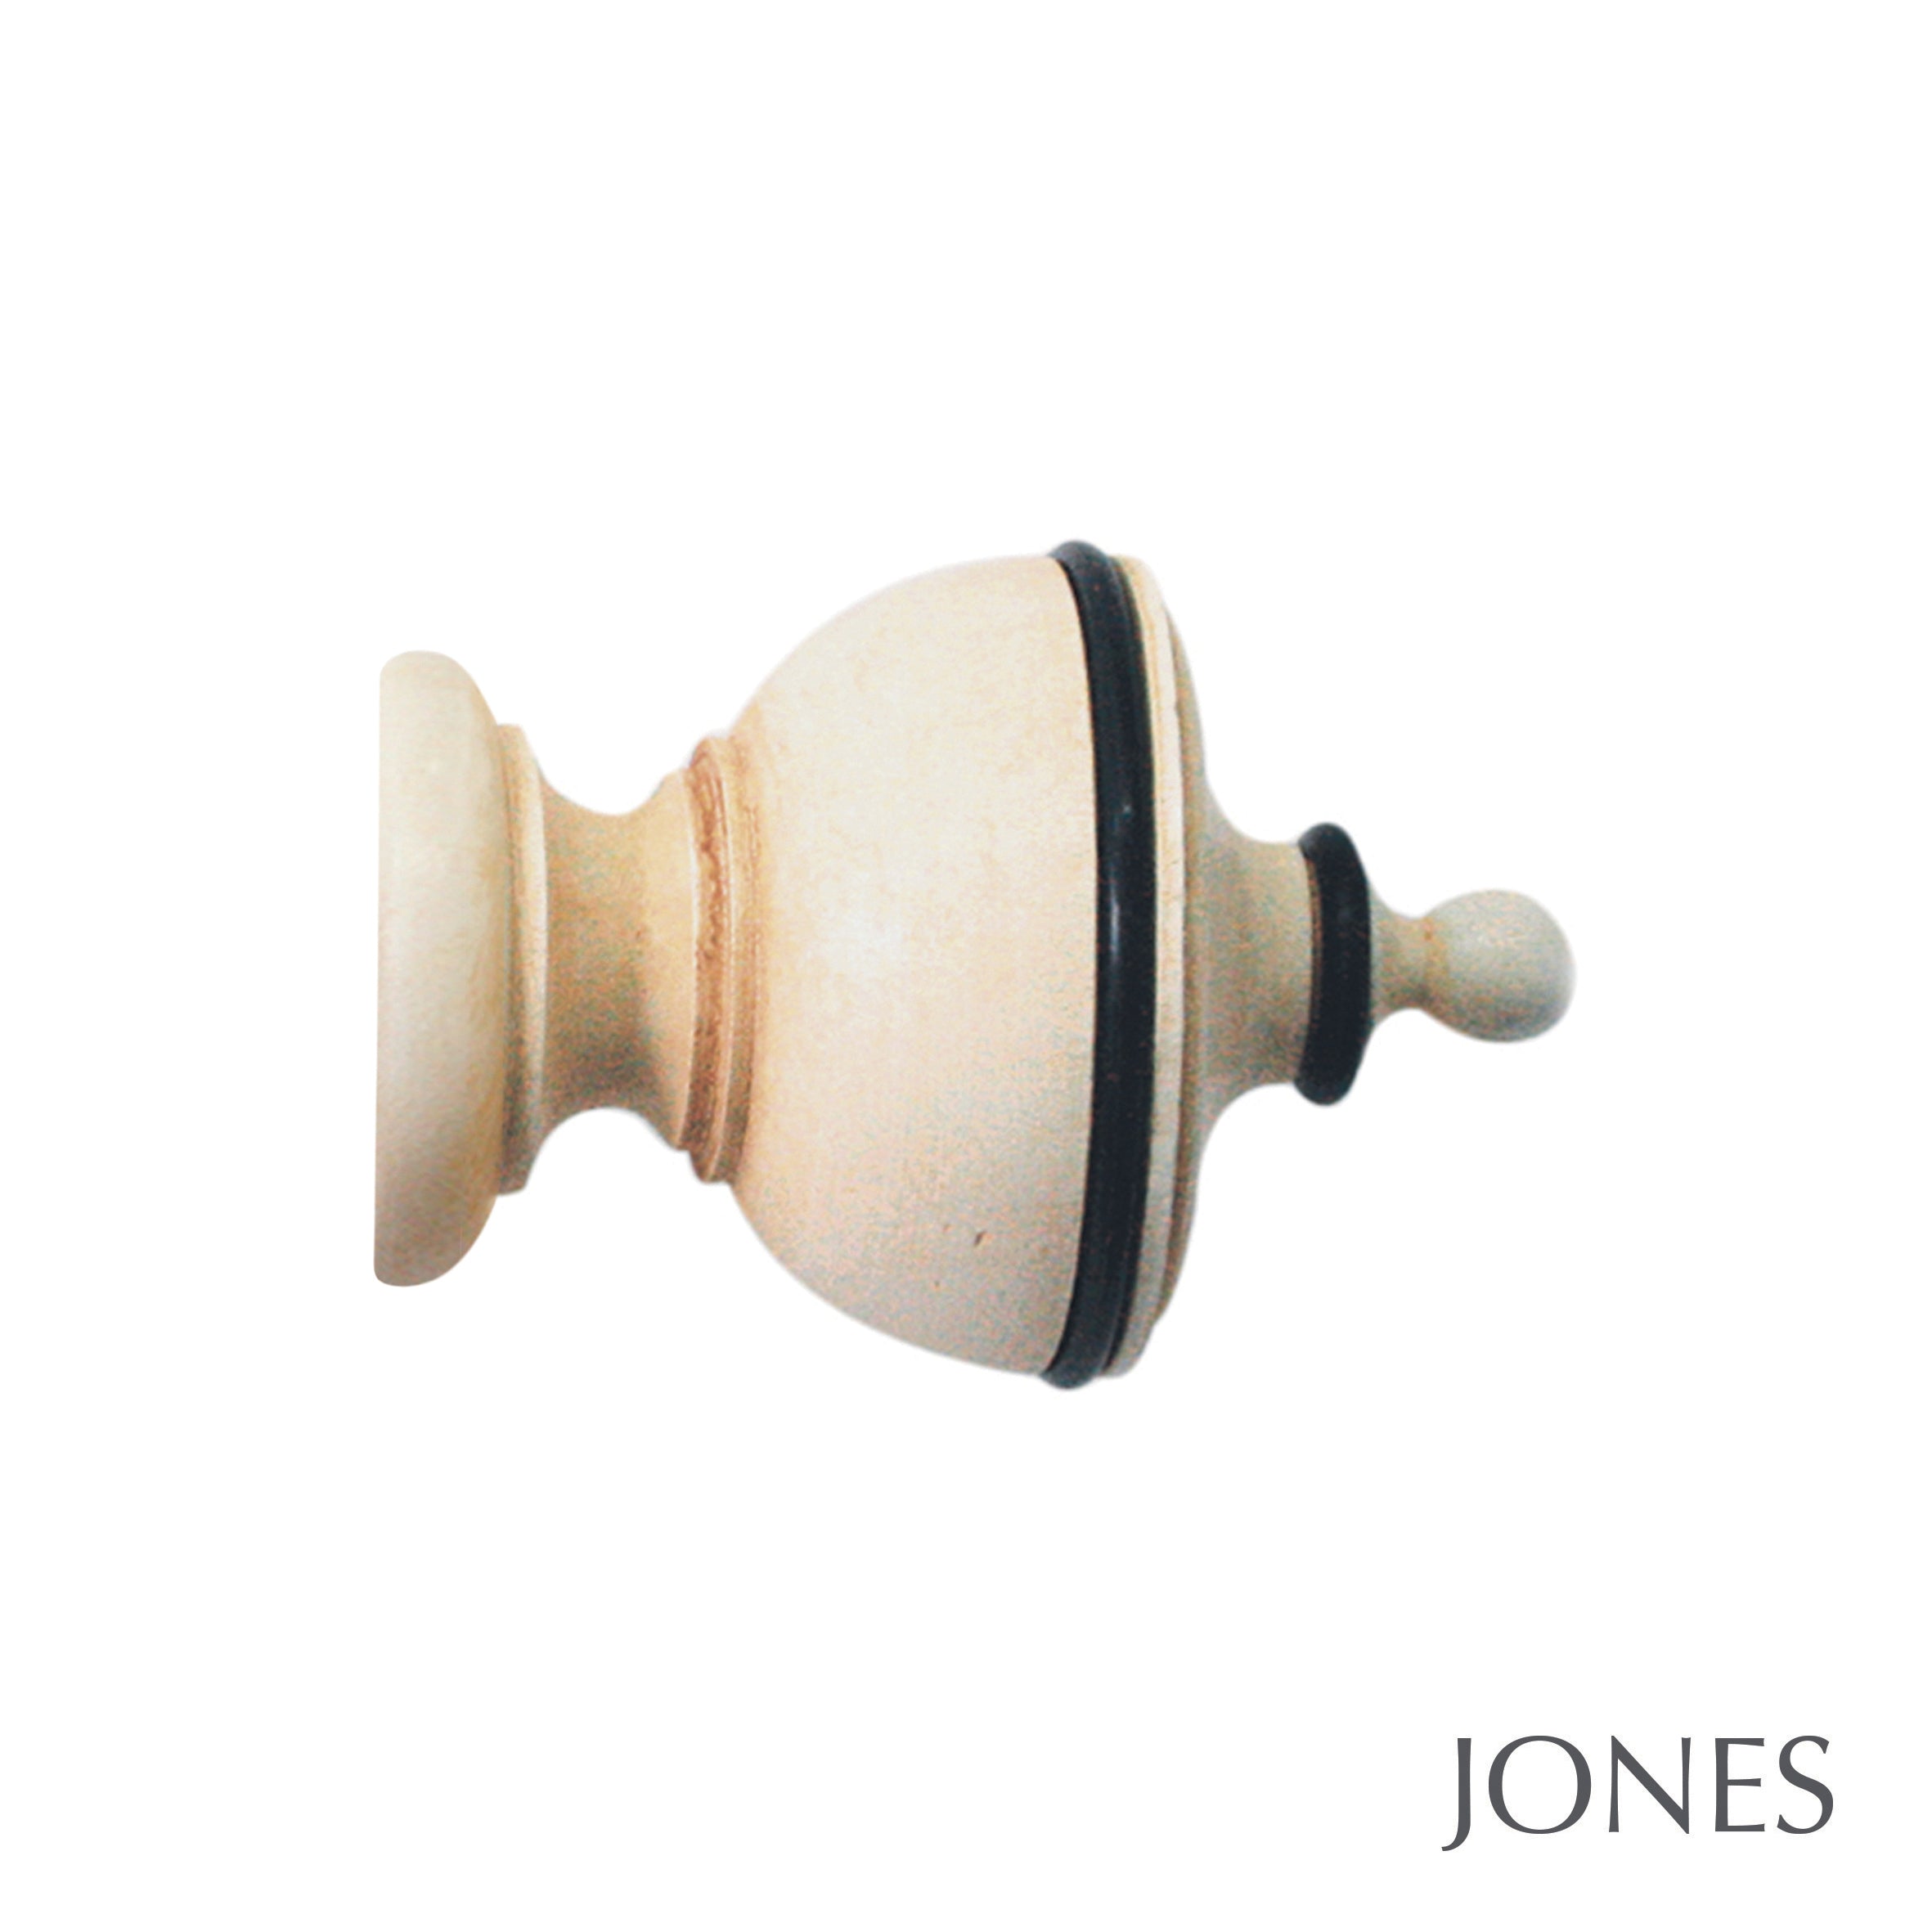 Jones Interiors Cathedral Exeter Finial Curtain Pole Set in Ivory